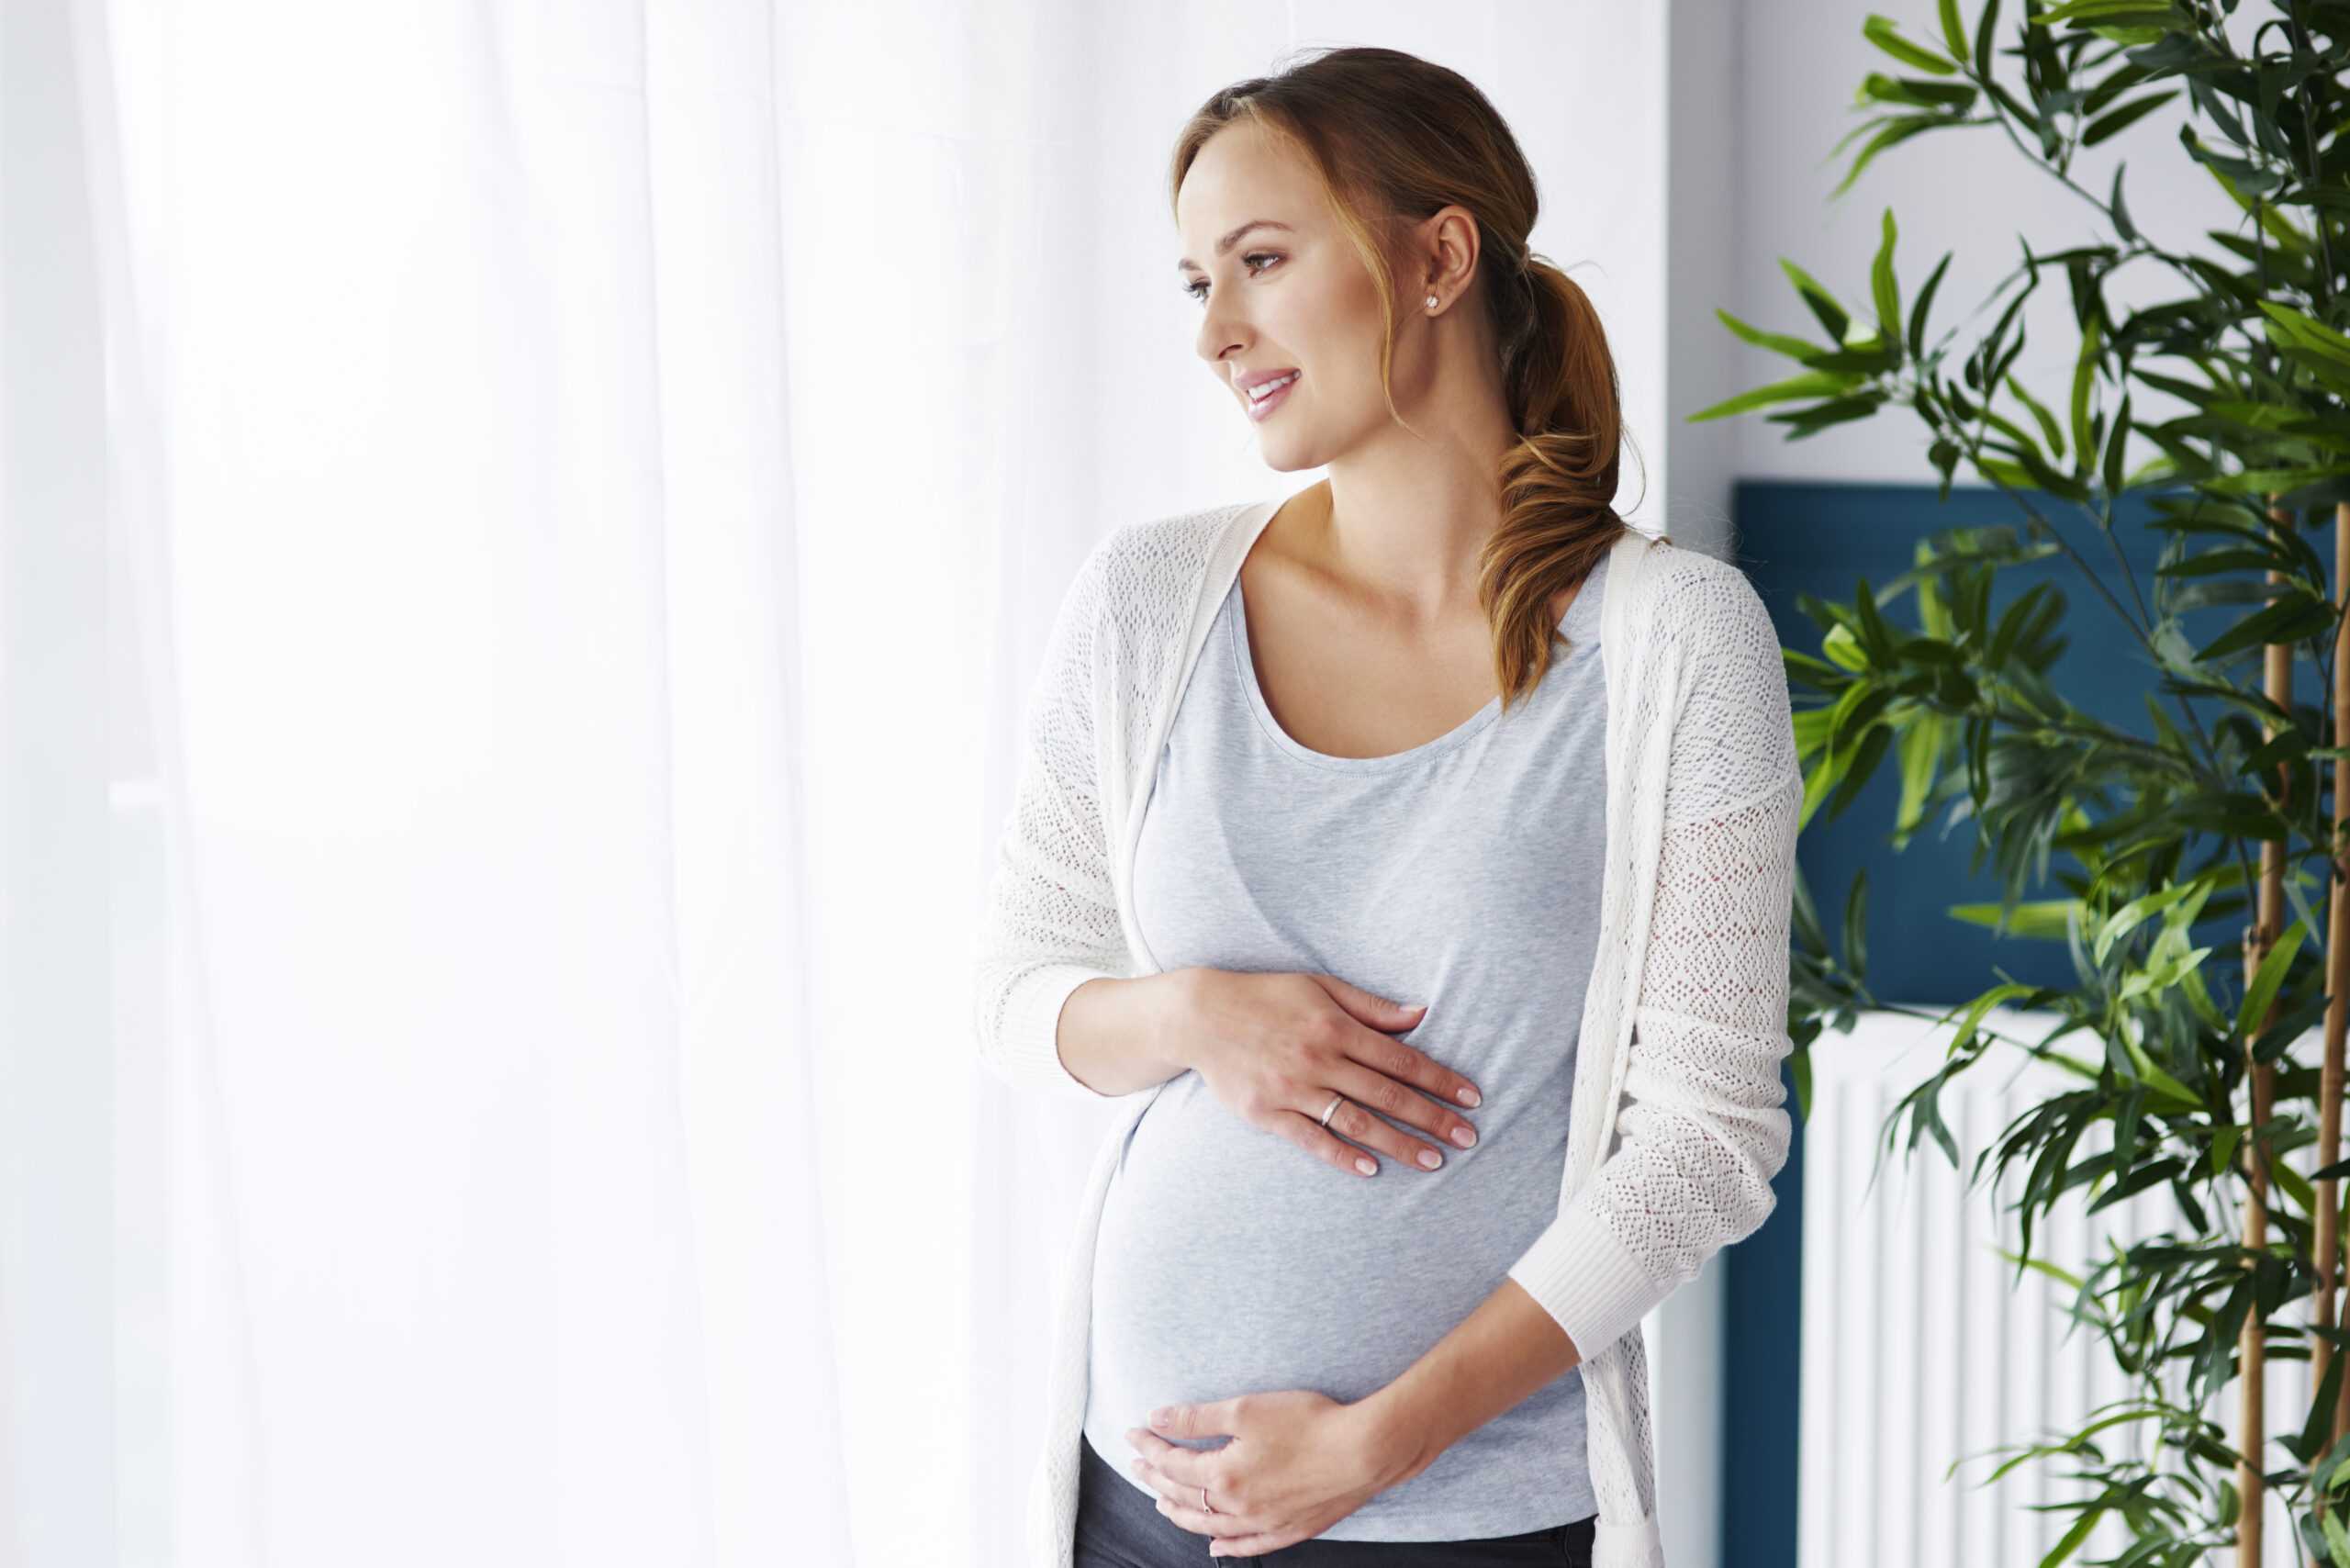 7 Tips for a Healthy Pregnancy You should know. – Credihealth Blog